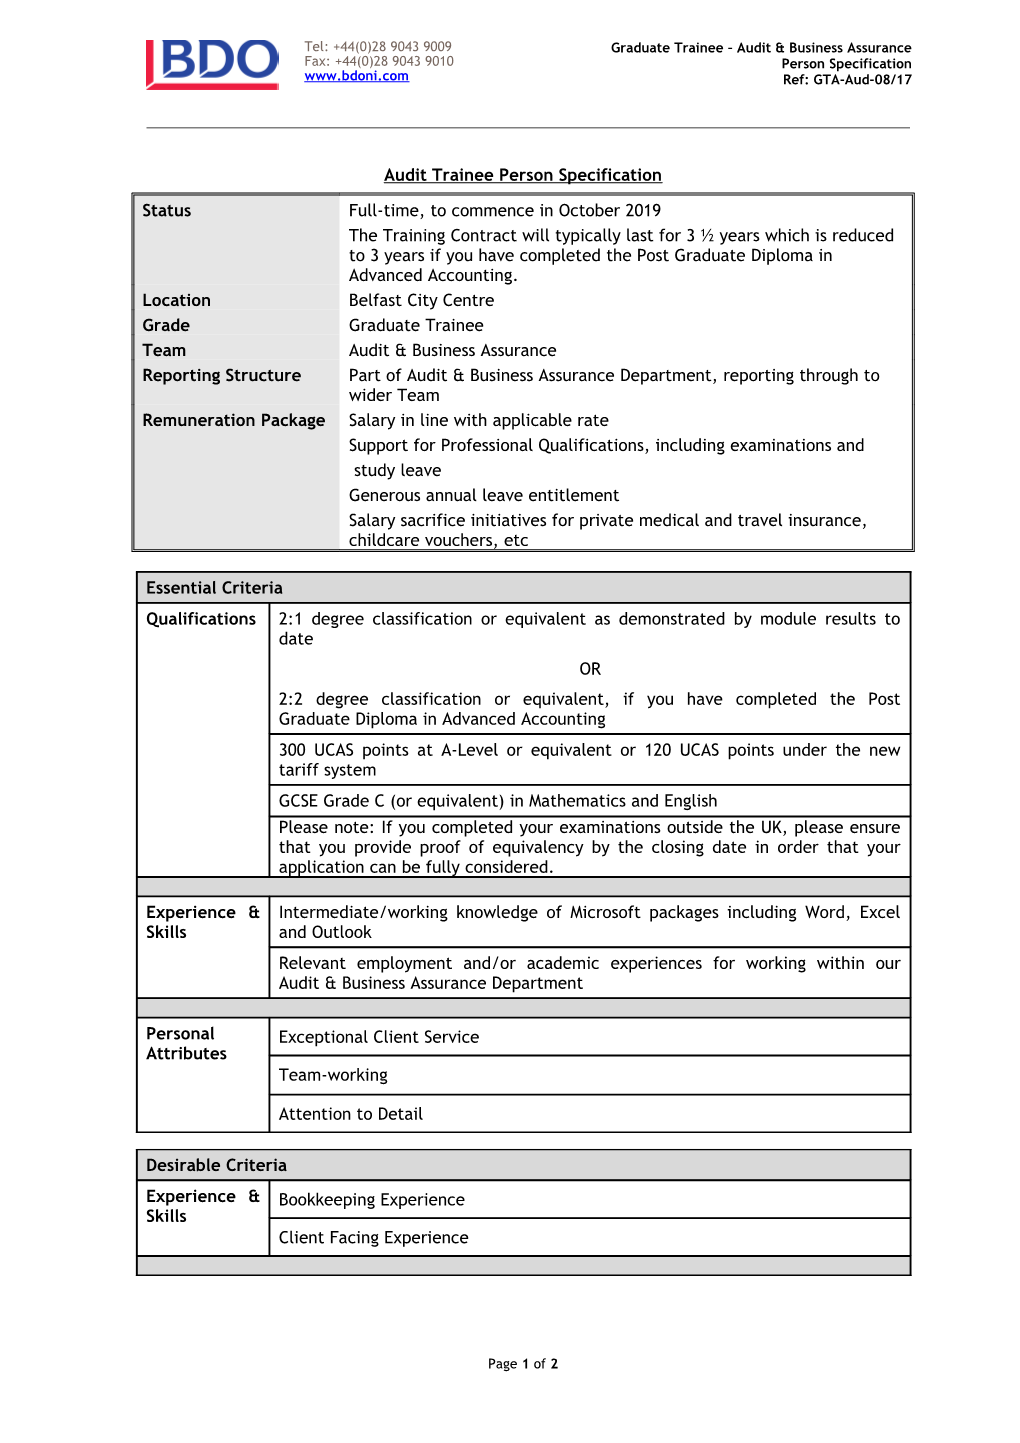 Audit Trainee Person Specification